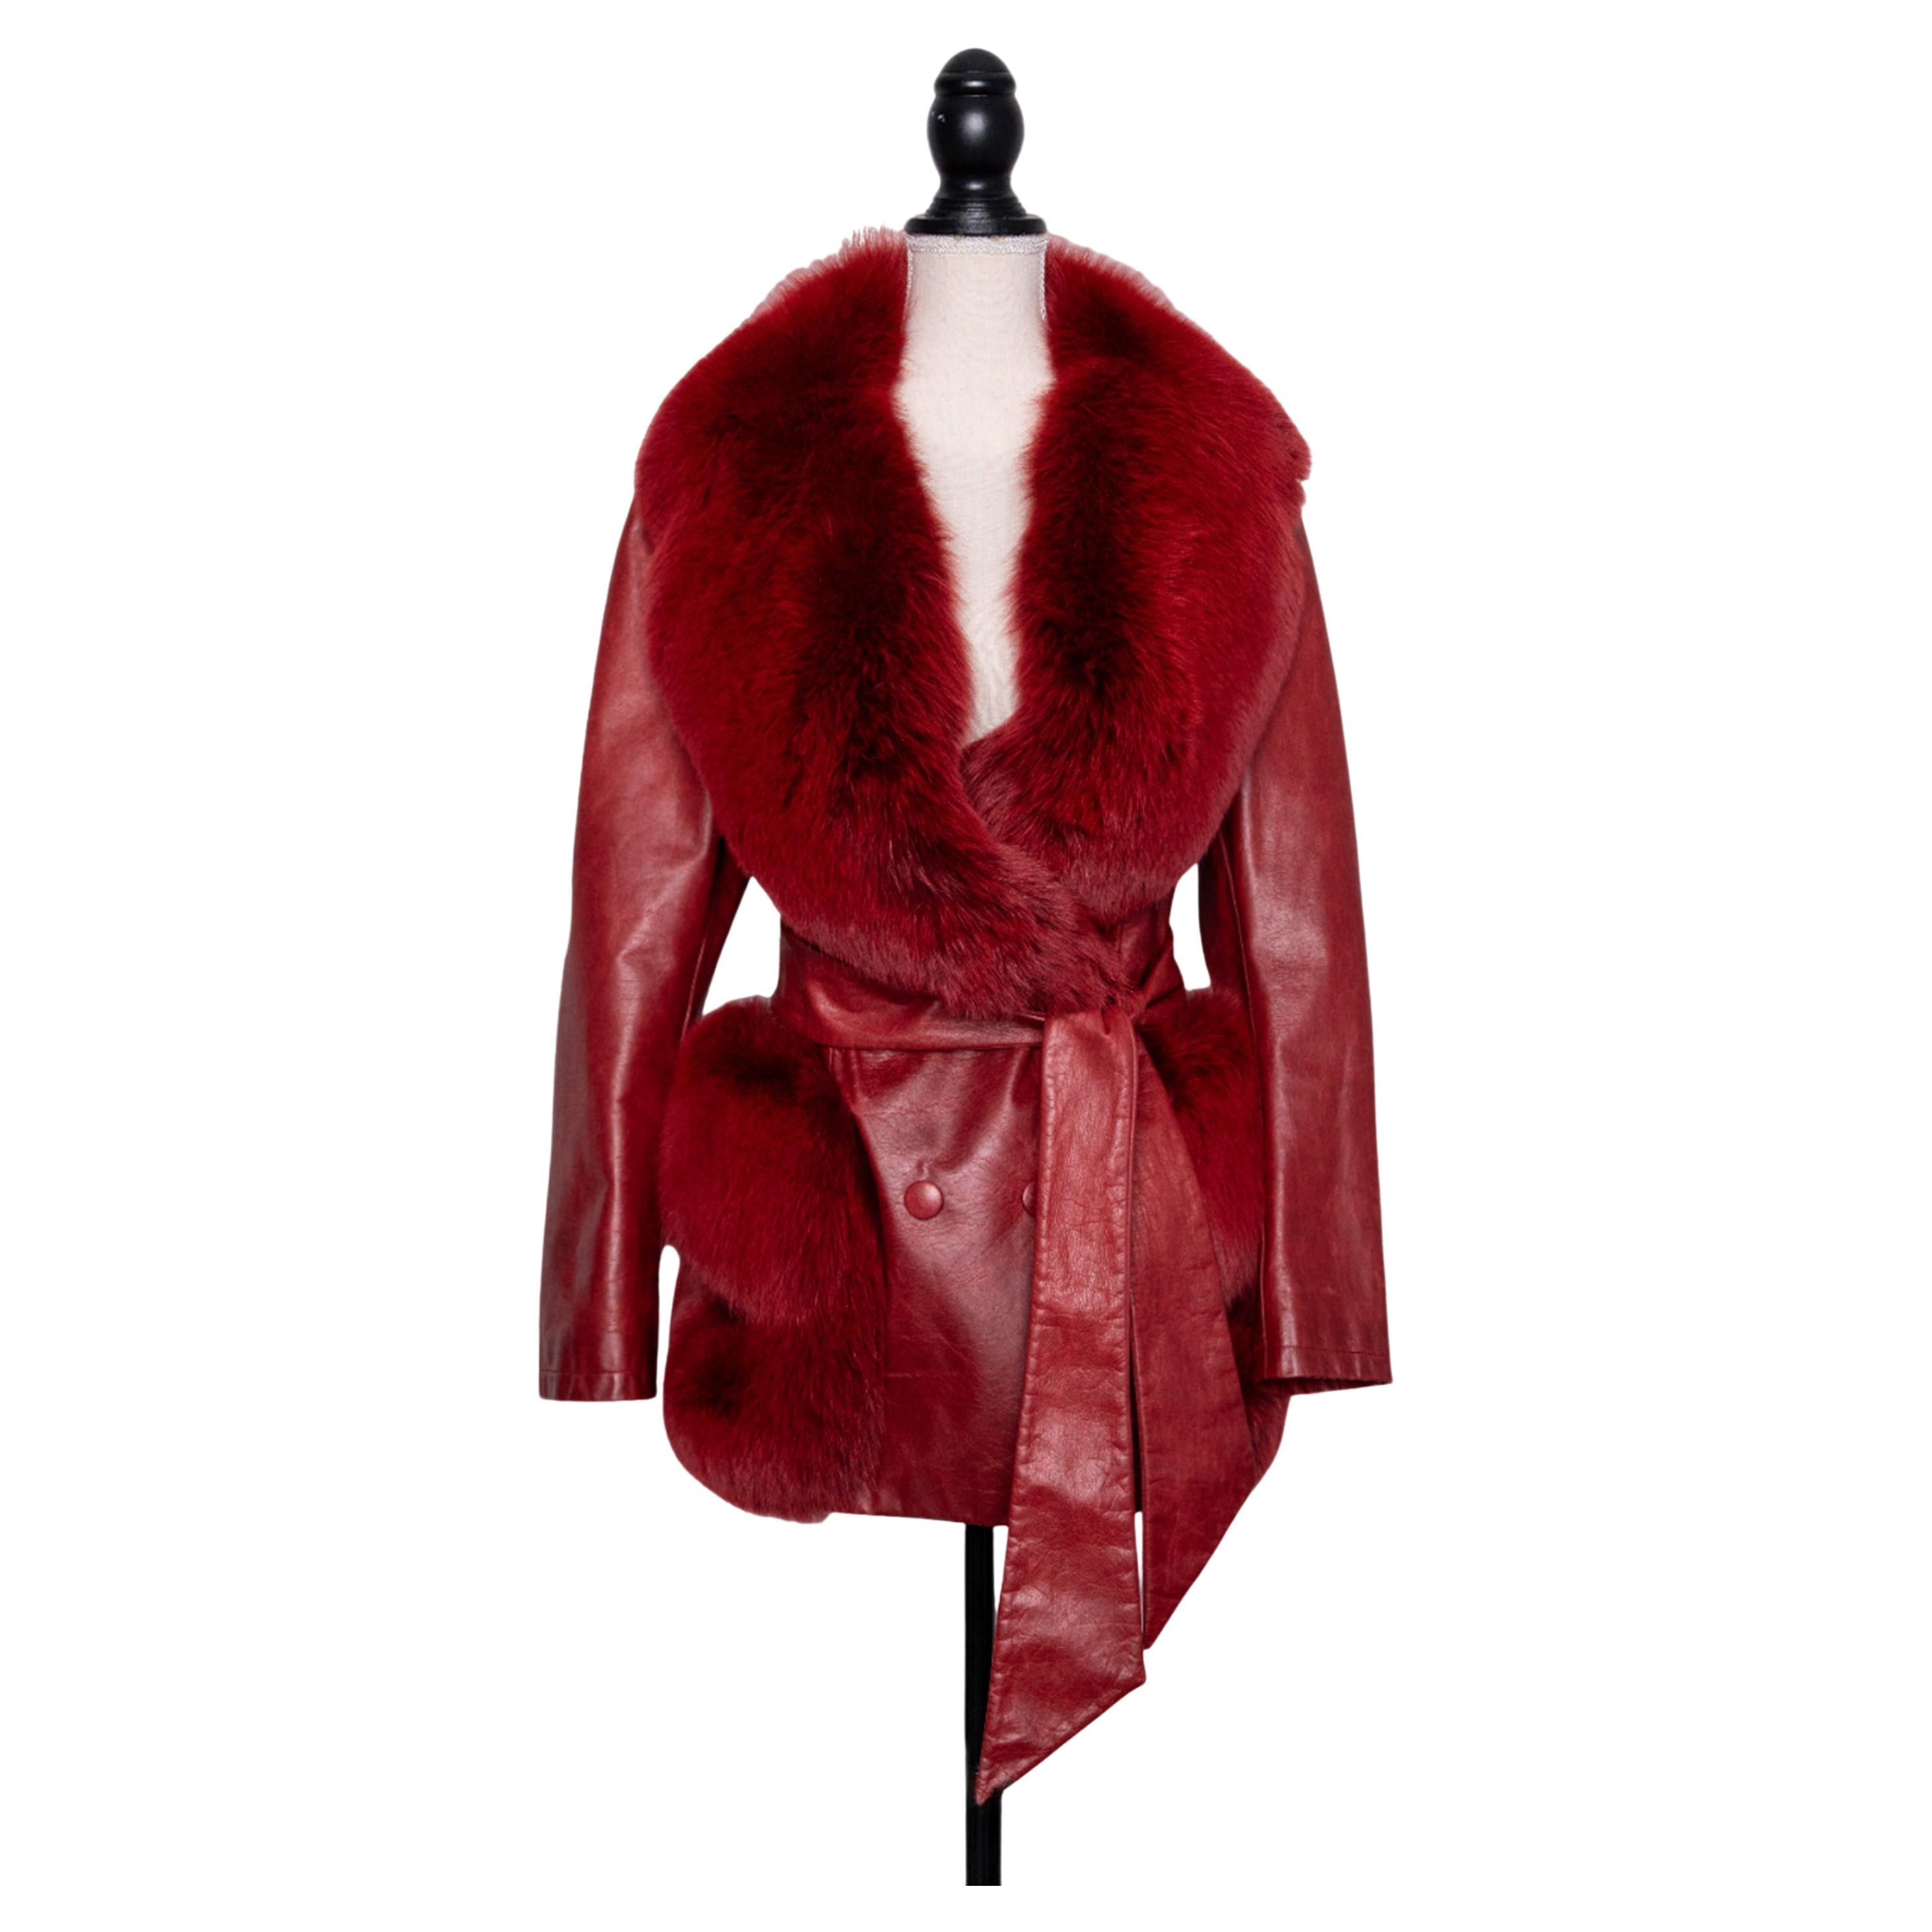 John Galliano Vintage Red Belted Leather Jacket with Fox Fur Collar - Size F42 For Sale